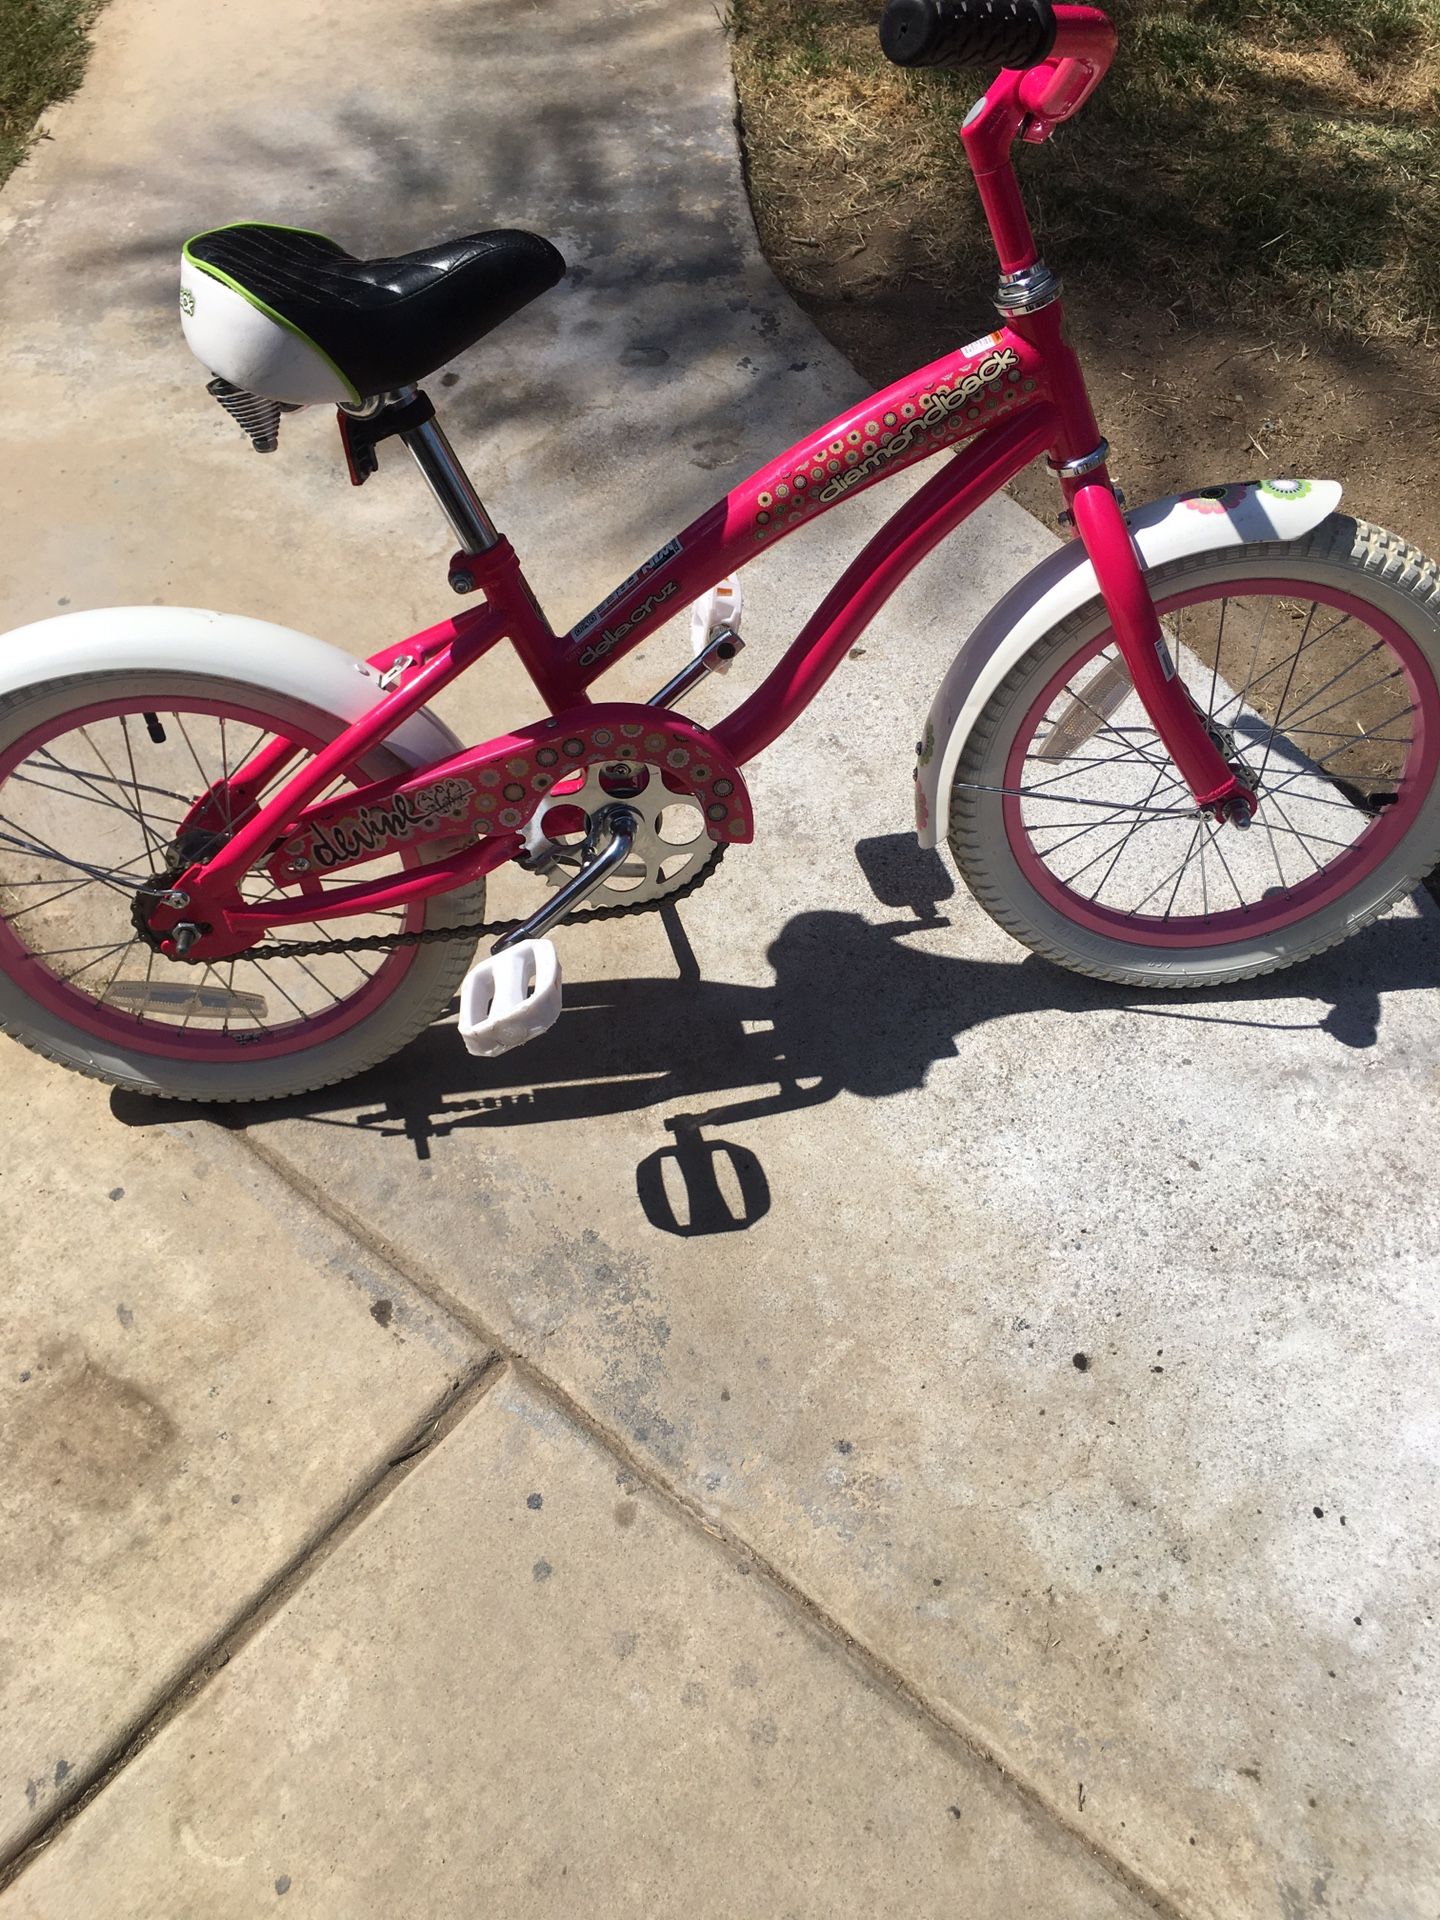 Bycecle Dimond Back Mini De La Cruz For  Sale 60:00 Dollars  Firm Price Good Condition  16  Inches  Tires Ready To Be Ridden 